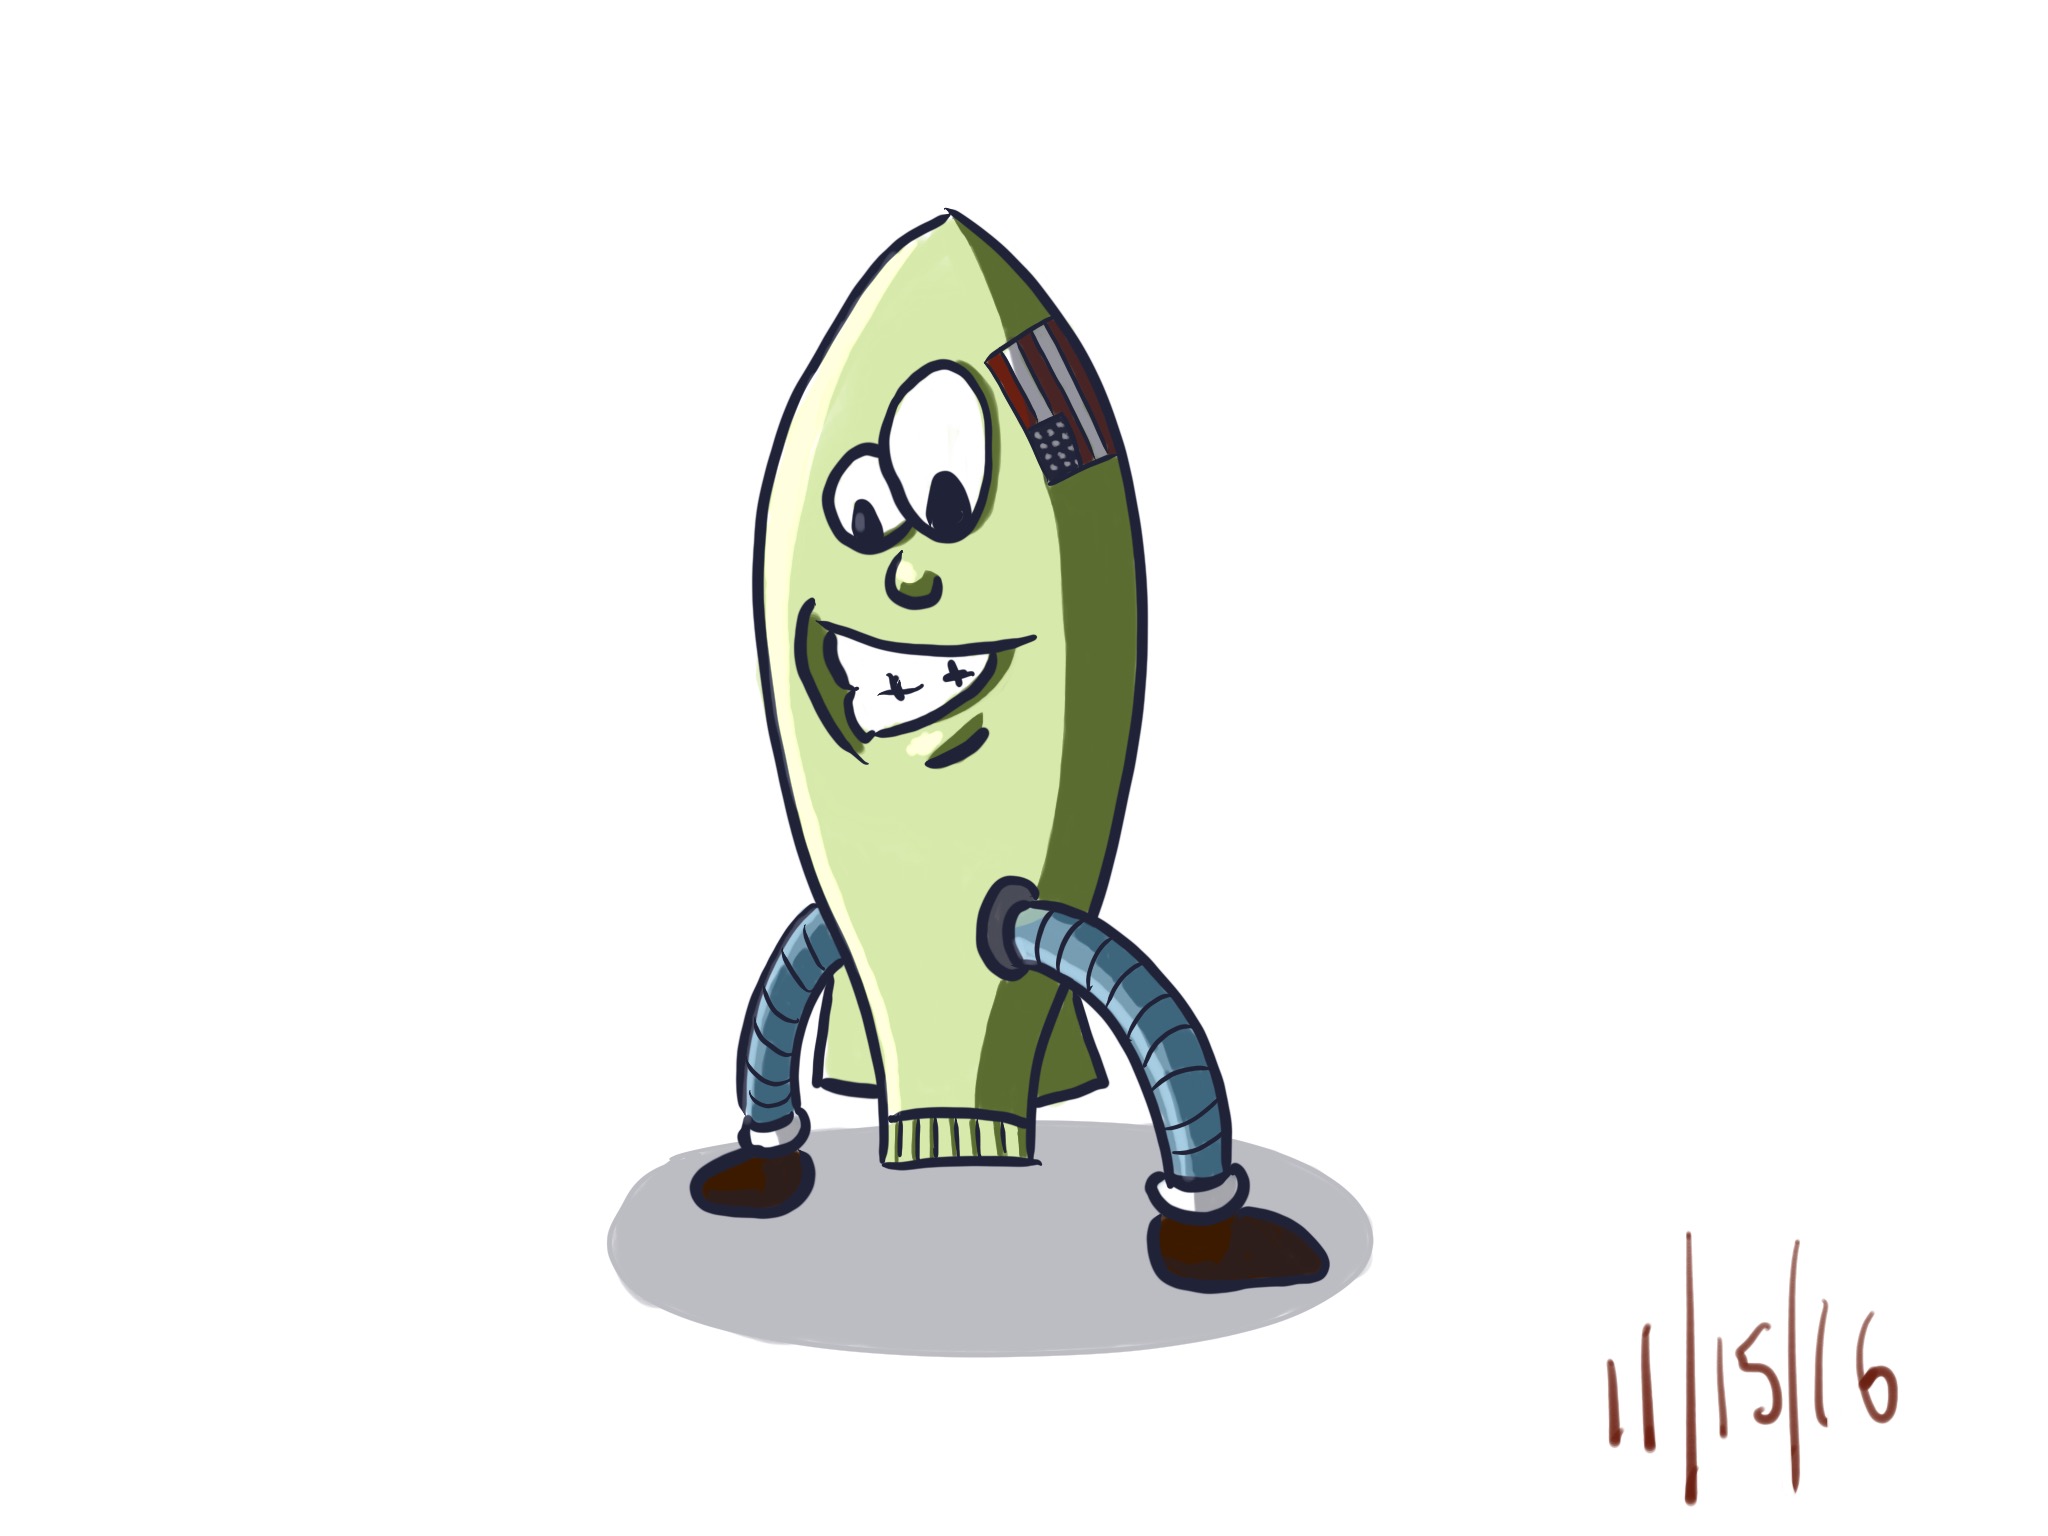 #gdpipeline daily challenge 11-15-16 "cartoony missile"